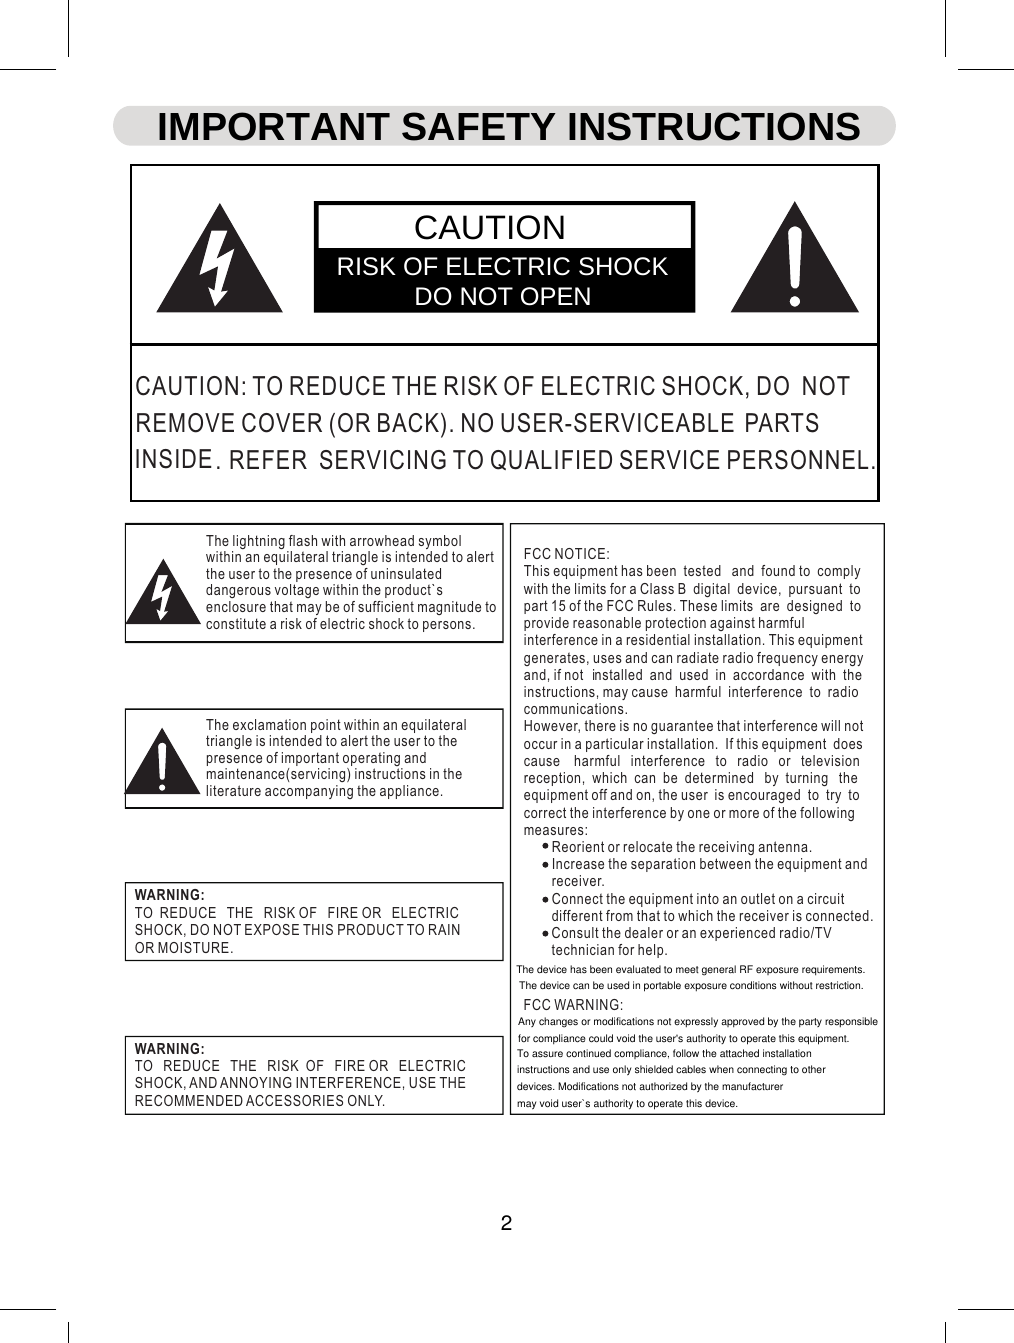 WARNING:TO  REDUCE   THE   RISK OF   FIRE OR   ELECTRICSHOCK, DO NOT EXPOSE THIS PRODUCT TO RAINOR MOISTURE.WARNING:TO   REDUCE   THE   RISK  OF   FIRE OR   ELECTRICSHOCK, AND ANNOYING INTERFERENCE, USE THERECOMMENDED ACCESSORIES ONLY.FCC NOTICE:This equipment has been  tested   and  found to  complywith the limits for a Class B  digital  device,  pursuant  topart 15 of the FCC Rules. These limits  are  designed  toprovide reasonable protection against harmfulinterference in a residential installation. This equipmentgenerates, uses and can radiate radio frequency energyand, if no nstalled  and  use n  accordance  with  theinstructions, may cause  harmful  interference  to  radiocommunications.However, there is no guarantee that interference will notoccur in a particular installation.  If this equipment  doescause    harmful   interference   to   radio   or   televisionreception,  which  can  be  determined   by  turning   theequipment off and on, the user  is encouraged  to  try  tocorrect the interference by one or more of the followingmeasures:        Reorient or relocate the receiving antenna.        Increase the separation between the equipment and        receiver.        Connect the equipment into an outlet on a circuit        different from that to which the receiver is connected.        Consult the dealer or an experienced radio/TV        technician for help.FCC WARNING:CAUTION: TO REDUCE THE RISK OF ELECTRIC SHOCK, DO  NOTEMOVE COVER (OR BACK). NO USER-SERVICEABLE ARTNSIDE EFER  SERVICING   T UALIFIED  ERVICE PERSONNEL.The lightning flash with arrowhead symbolwithin an equilateral triangle is intended to alertthe user to the presence of uninsulateddangerous voltage within the product`senclosure that may be of sufficient magnitude toconstitute a risk of electric shock to persons.The exclamation point within an equilateraltriangle is intended to alert the user to thepresence of important operating andmaintenance(servicing) instructions in theliterature accompanying the appliance.S   IPSO Q. RRt   d  iiCAUTIONRISK OF ELECTRIC SHOCK            DO NOT OPENIMPORTANT SAFETY INSTRUCTIONS2The device has been evaluated to meet general RF exposure requirements. The device can be used in portable exposure conditions without restriction.Any changes or modifications not expressly approved by the party responsible for compliance could void the user&apos;s authority to operate this equipment.To assure continued compliance, follow the attached installation instructions and use only shielded cables when connecting to other devices. Modifications not authorized by the manufacturer may void user`s authority to operate this device.